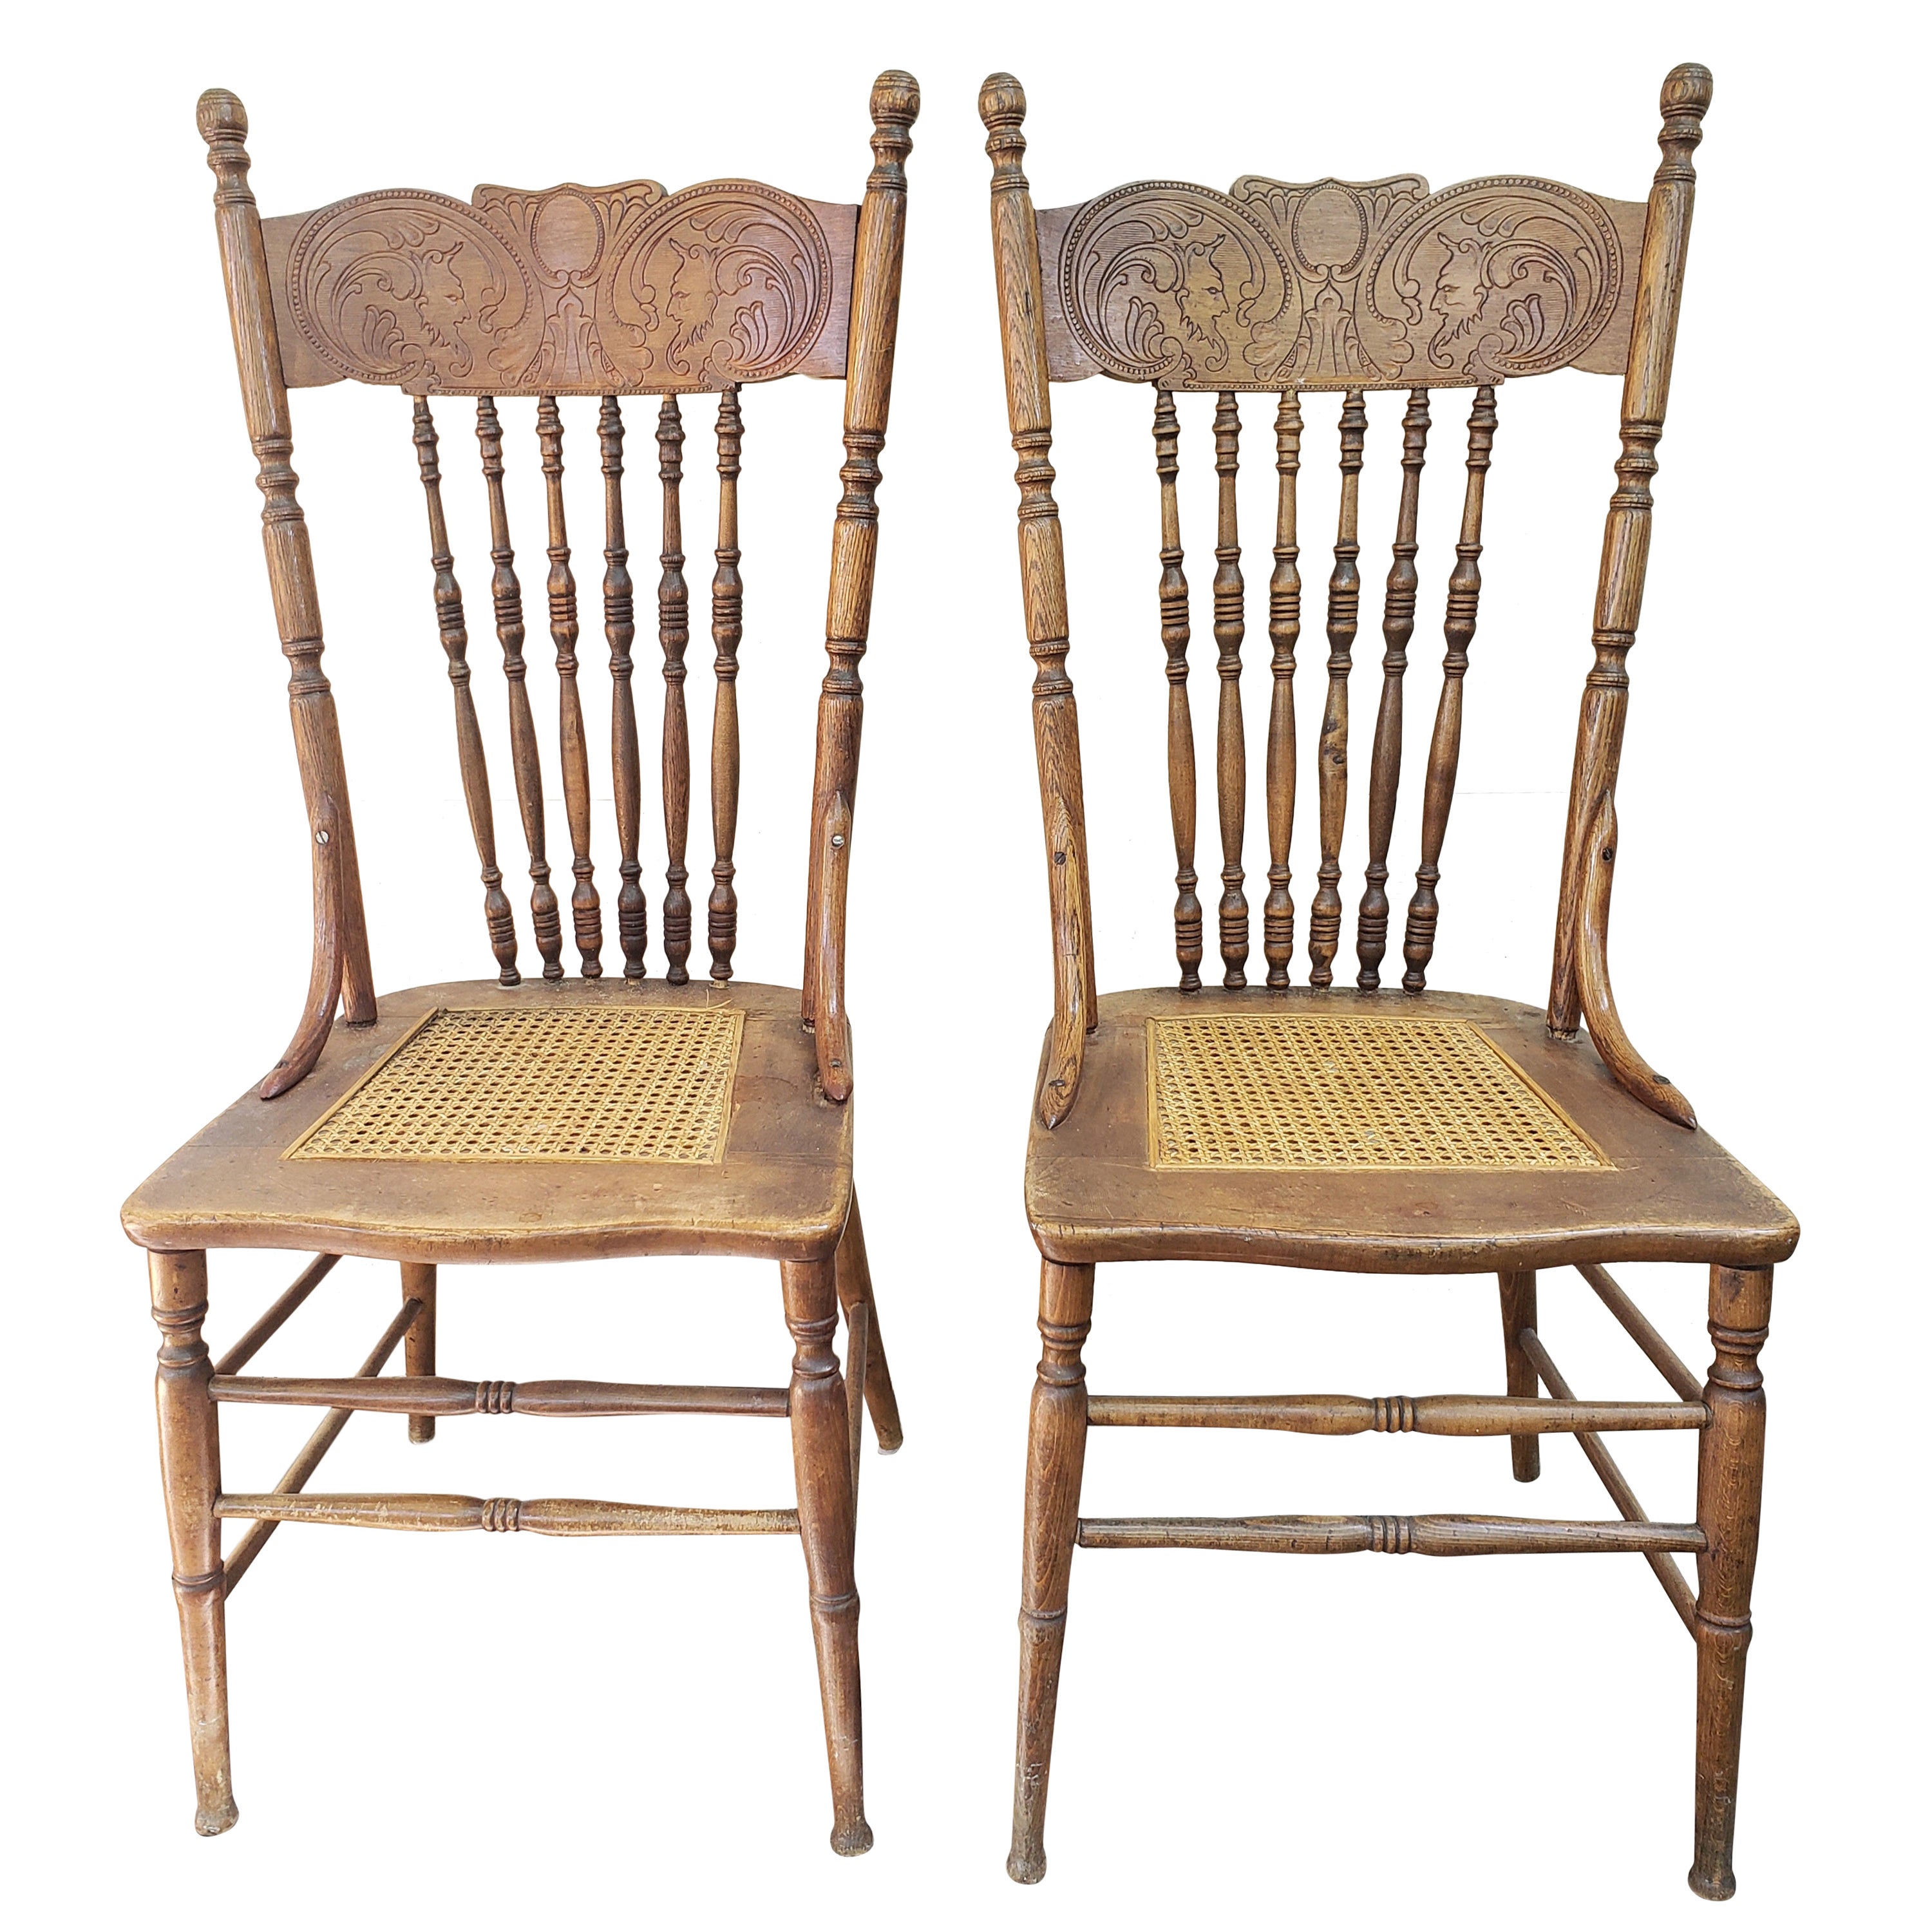 Vintage Oak Pressback Chairs with Cane Seats, a Pair For Sale